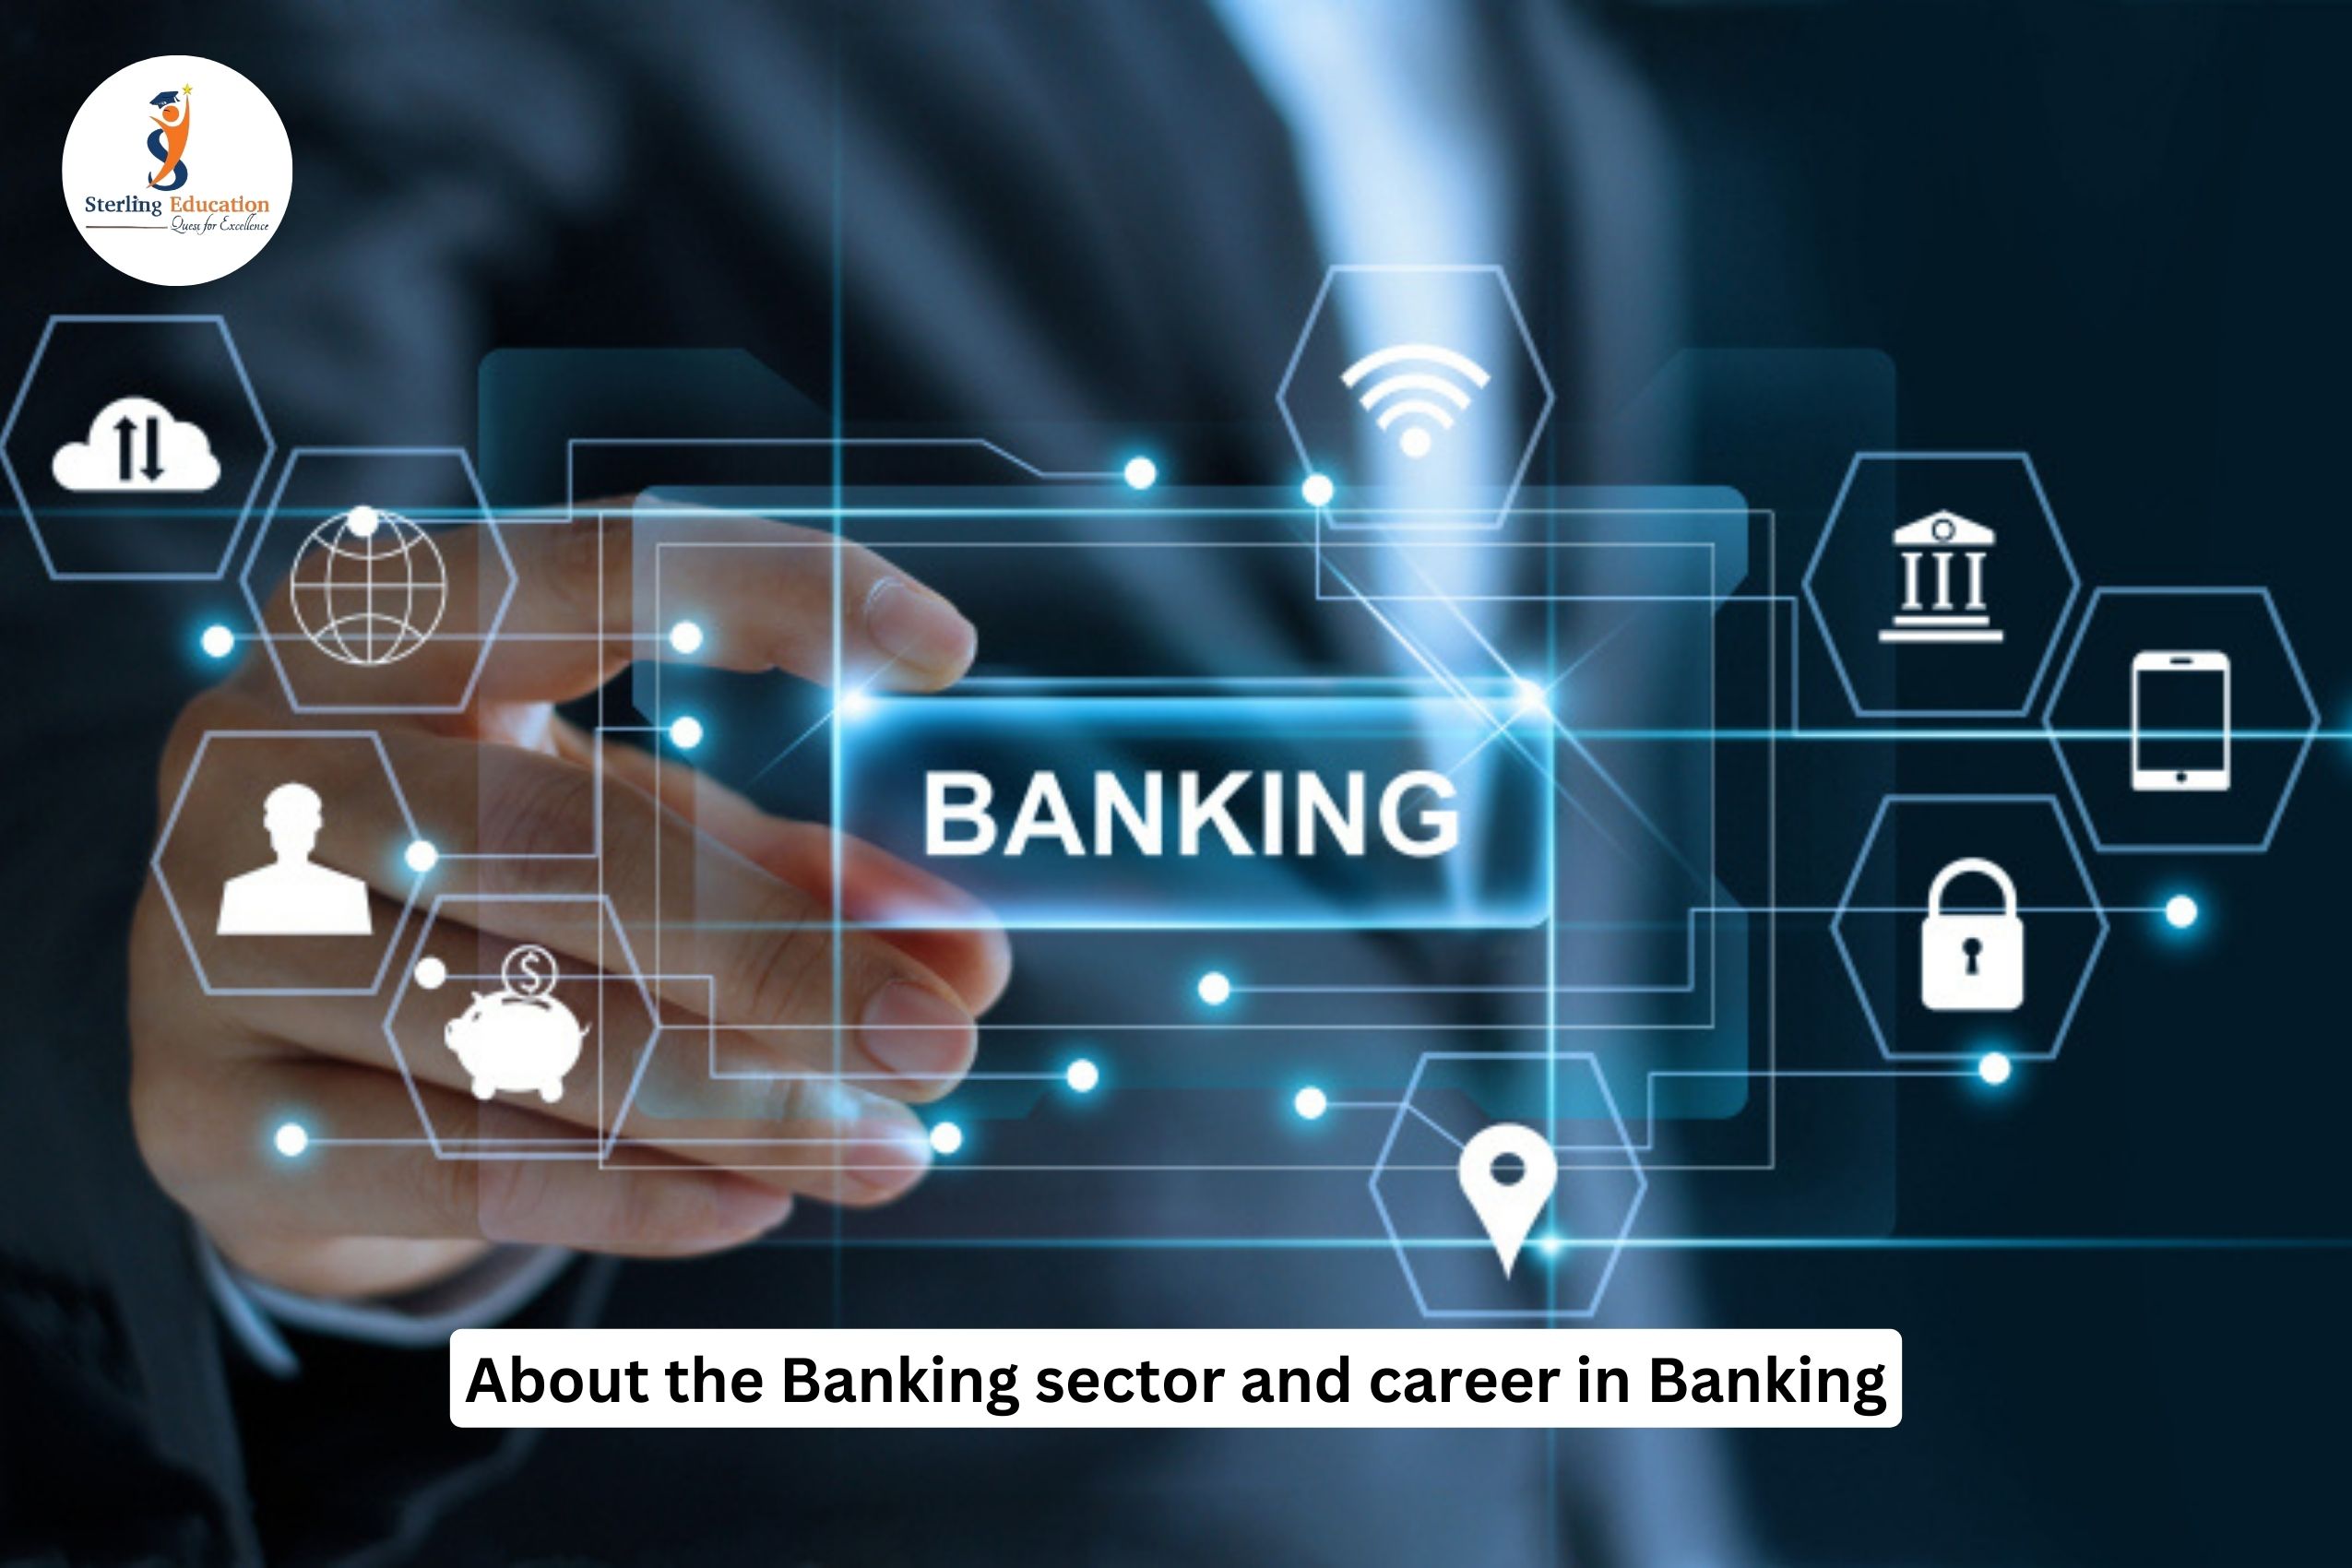 About the Banking sector and career in Banking